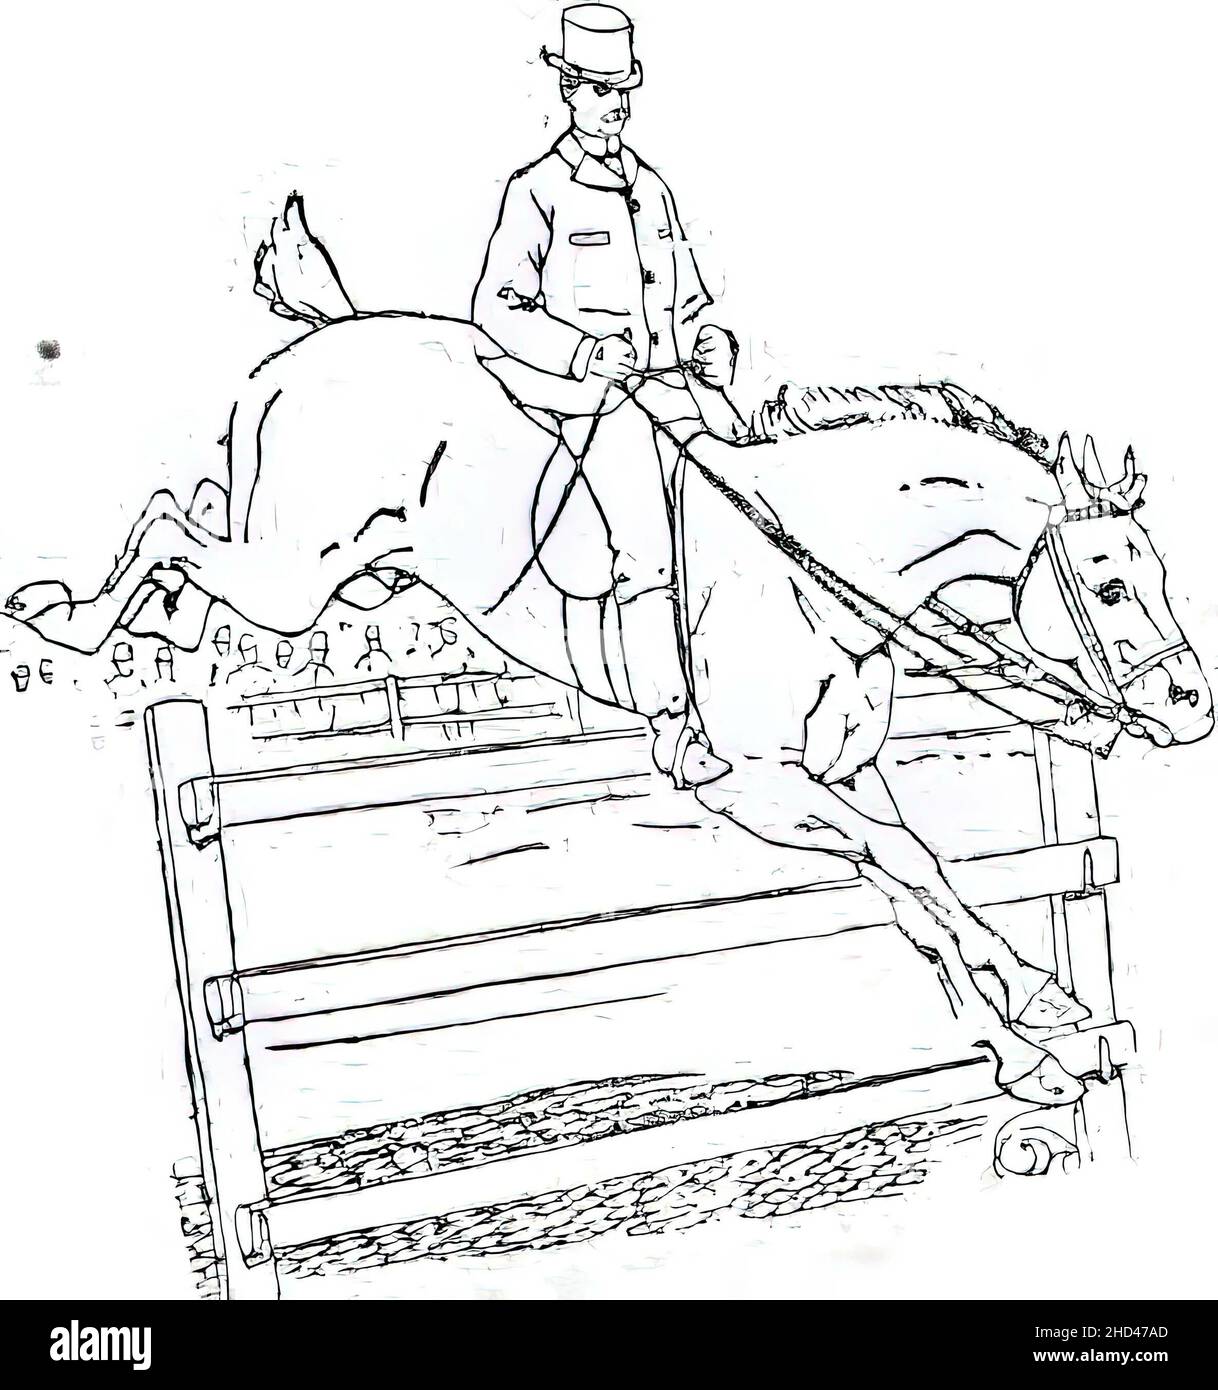 A black and white drawing of a rider on a horse during a contest jumping over a fen Stock Photo